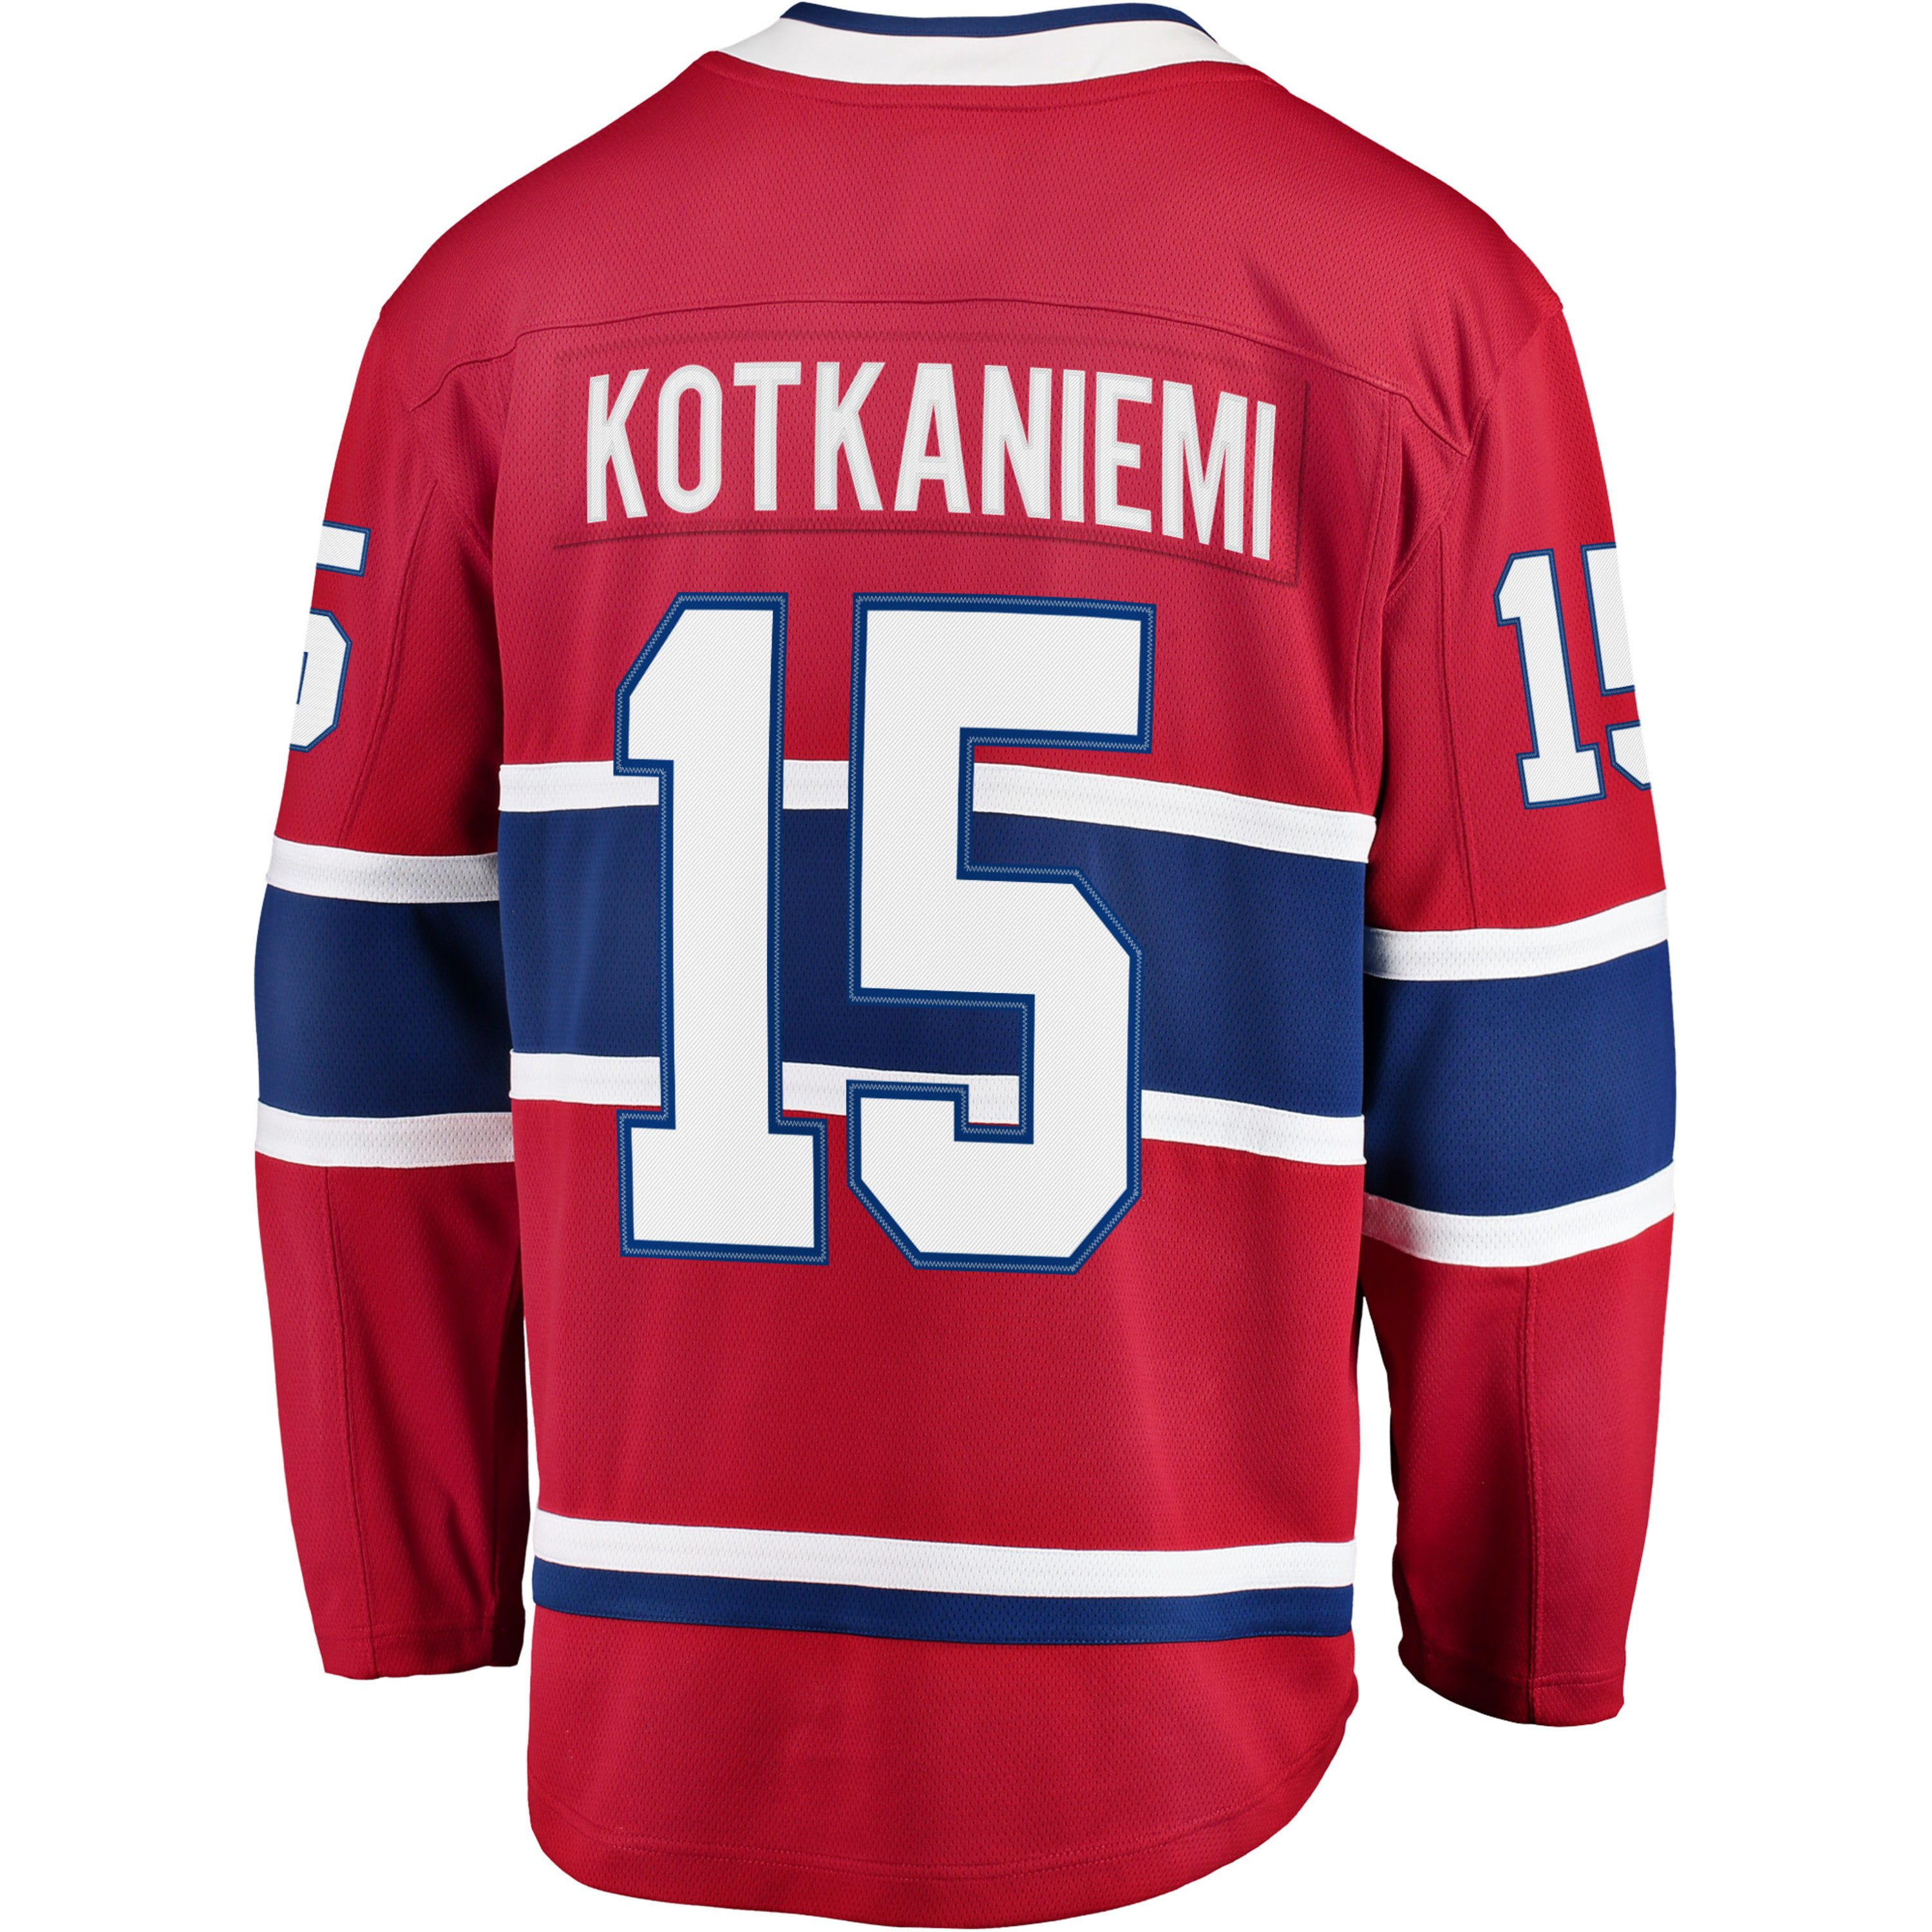 where to buy montreal canadiens jersey